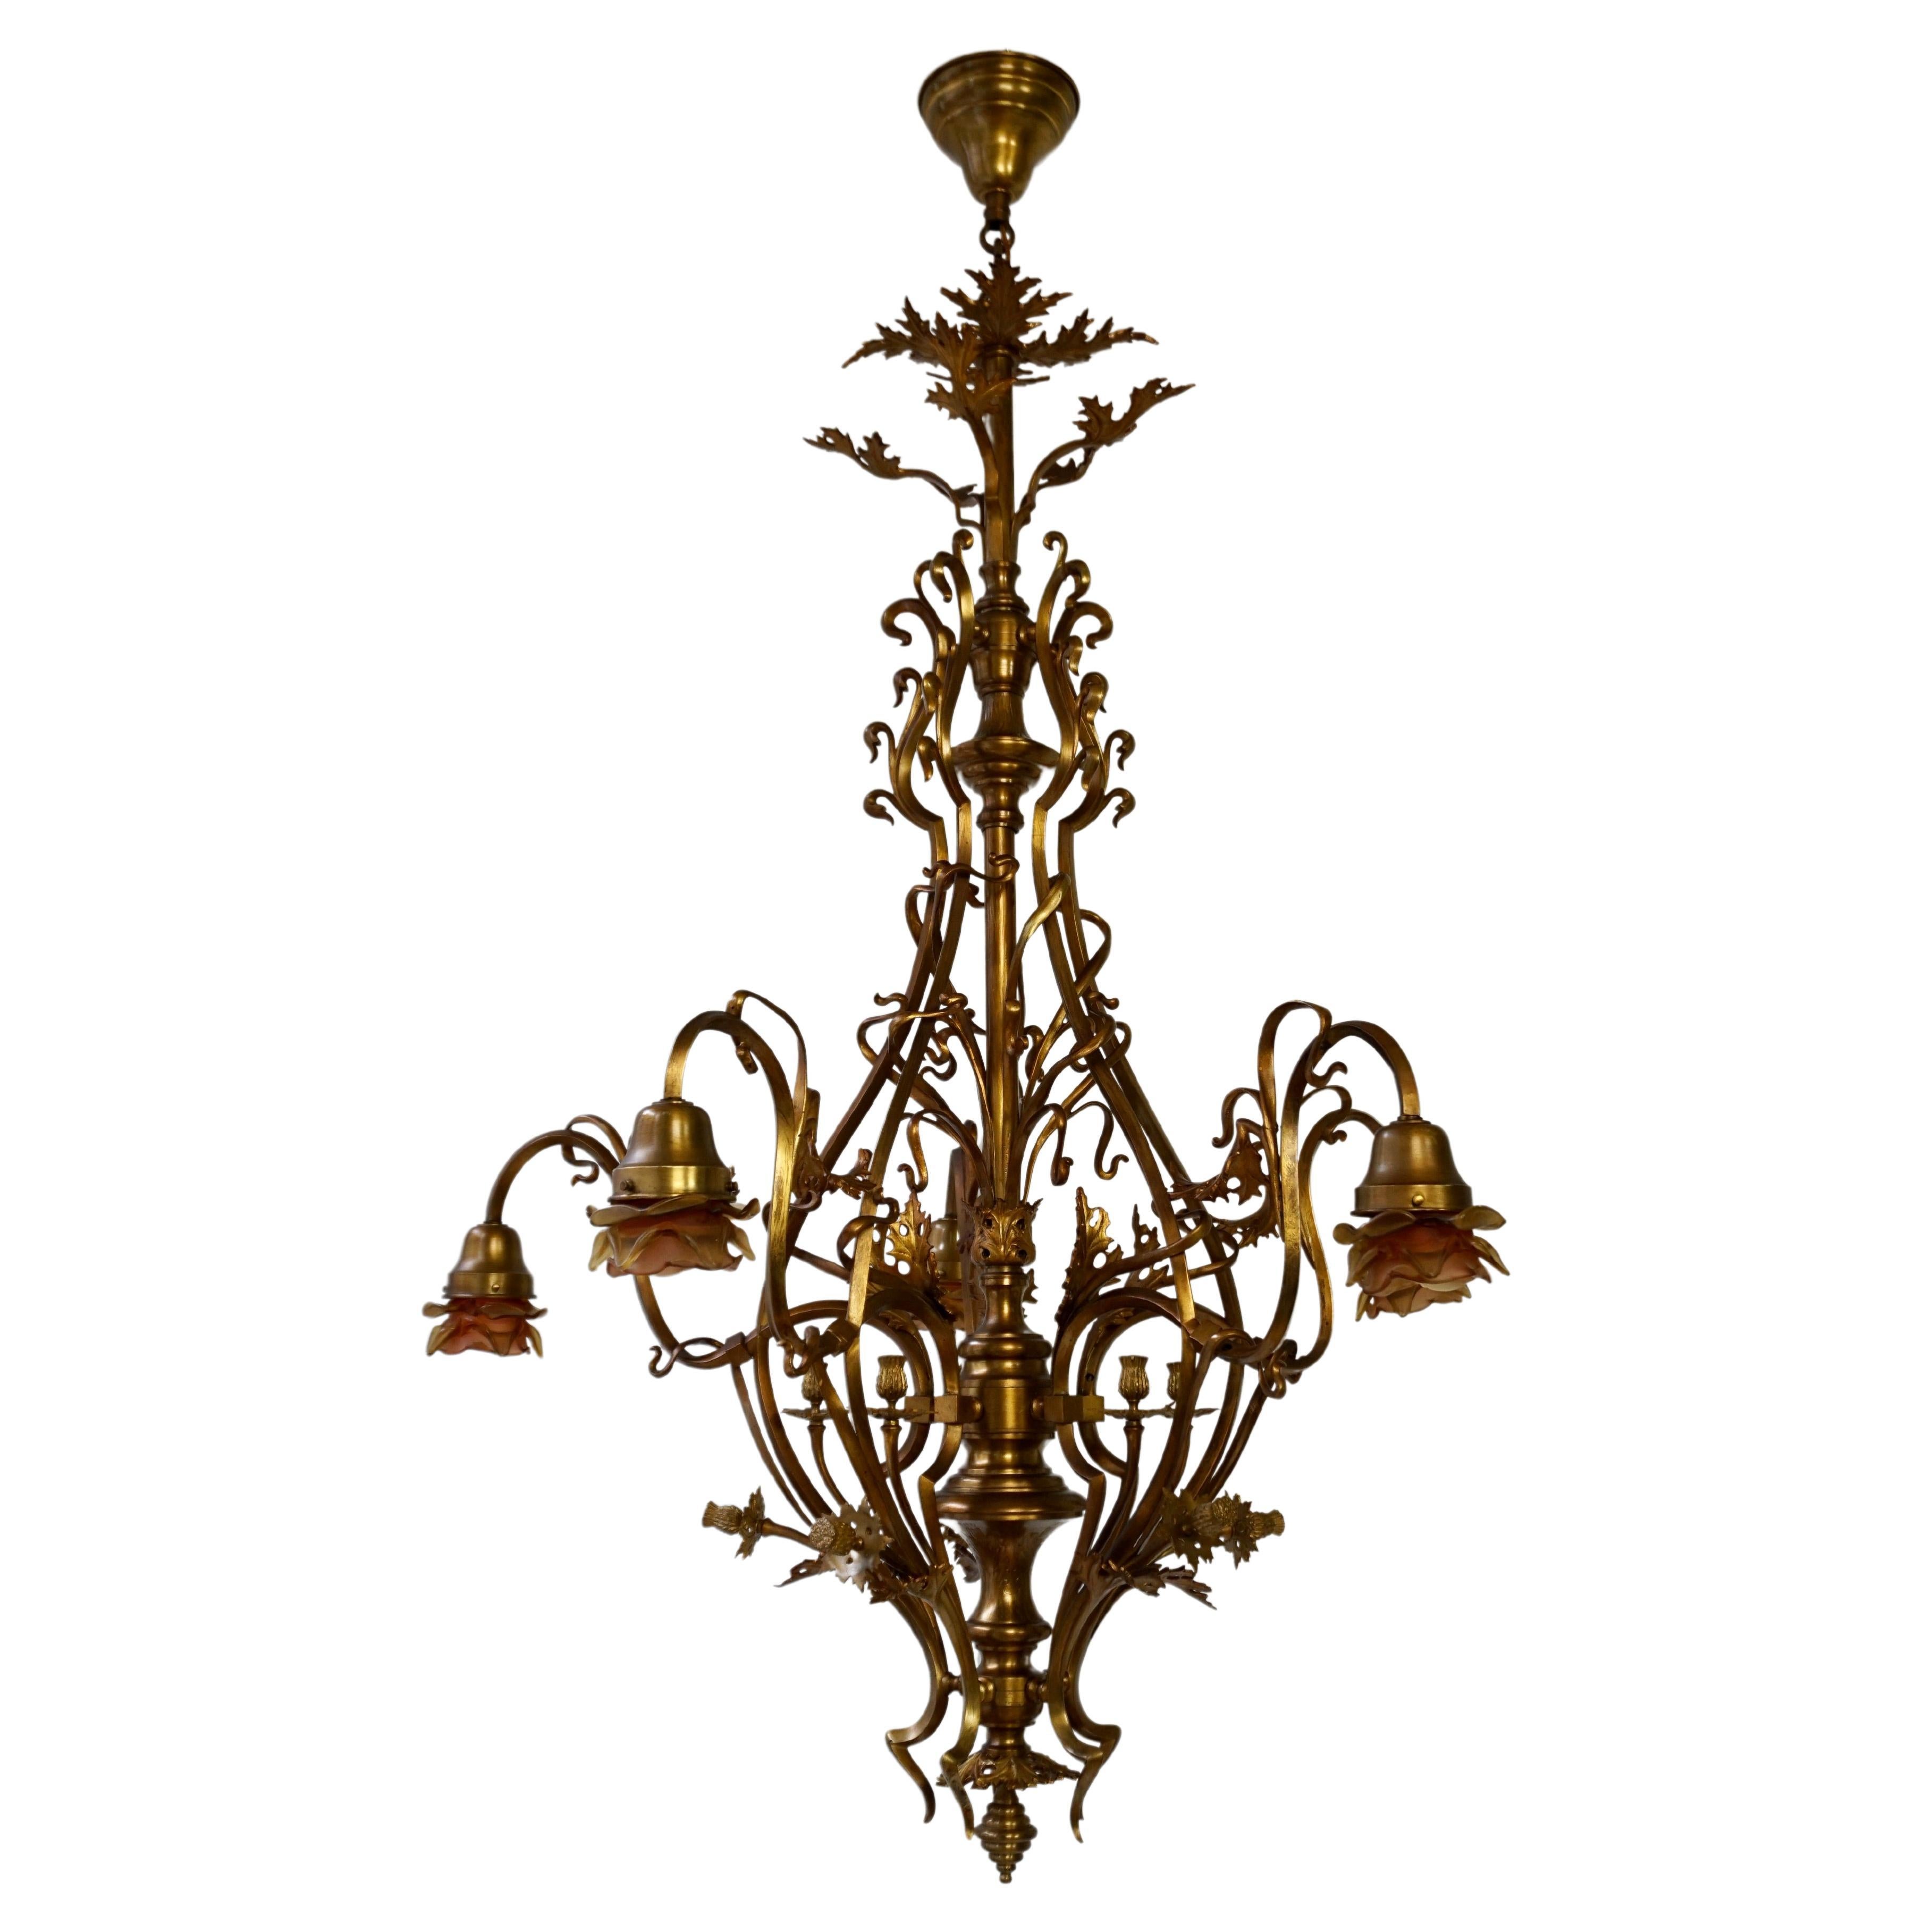 French Large and Top Quality, Elegant & Exquisite 5 Light Art Nouveau Chandelier For Sale